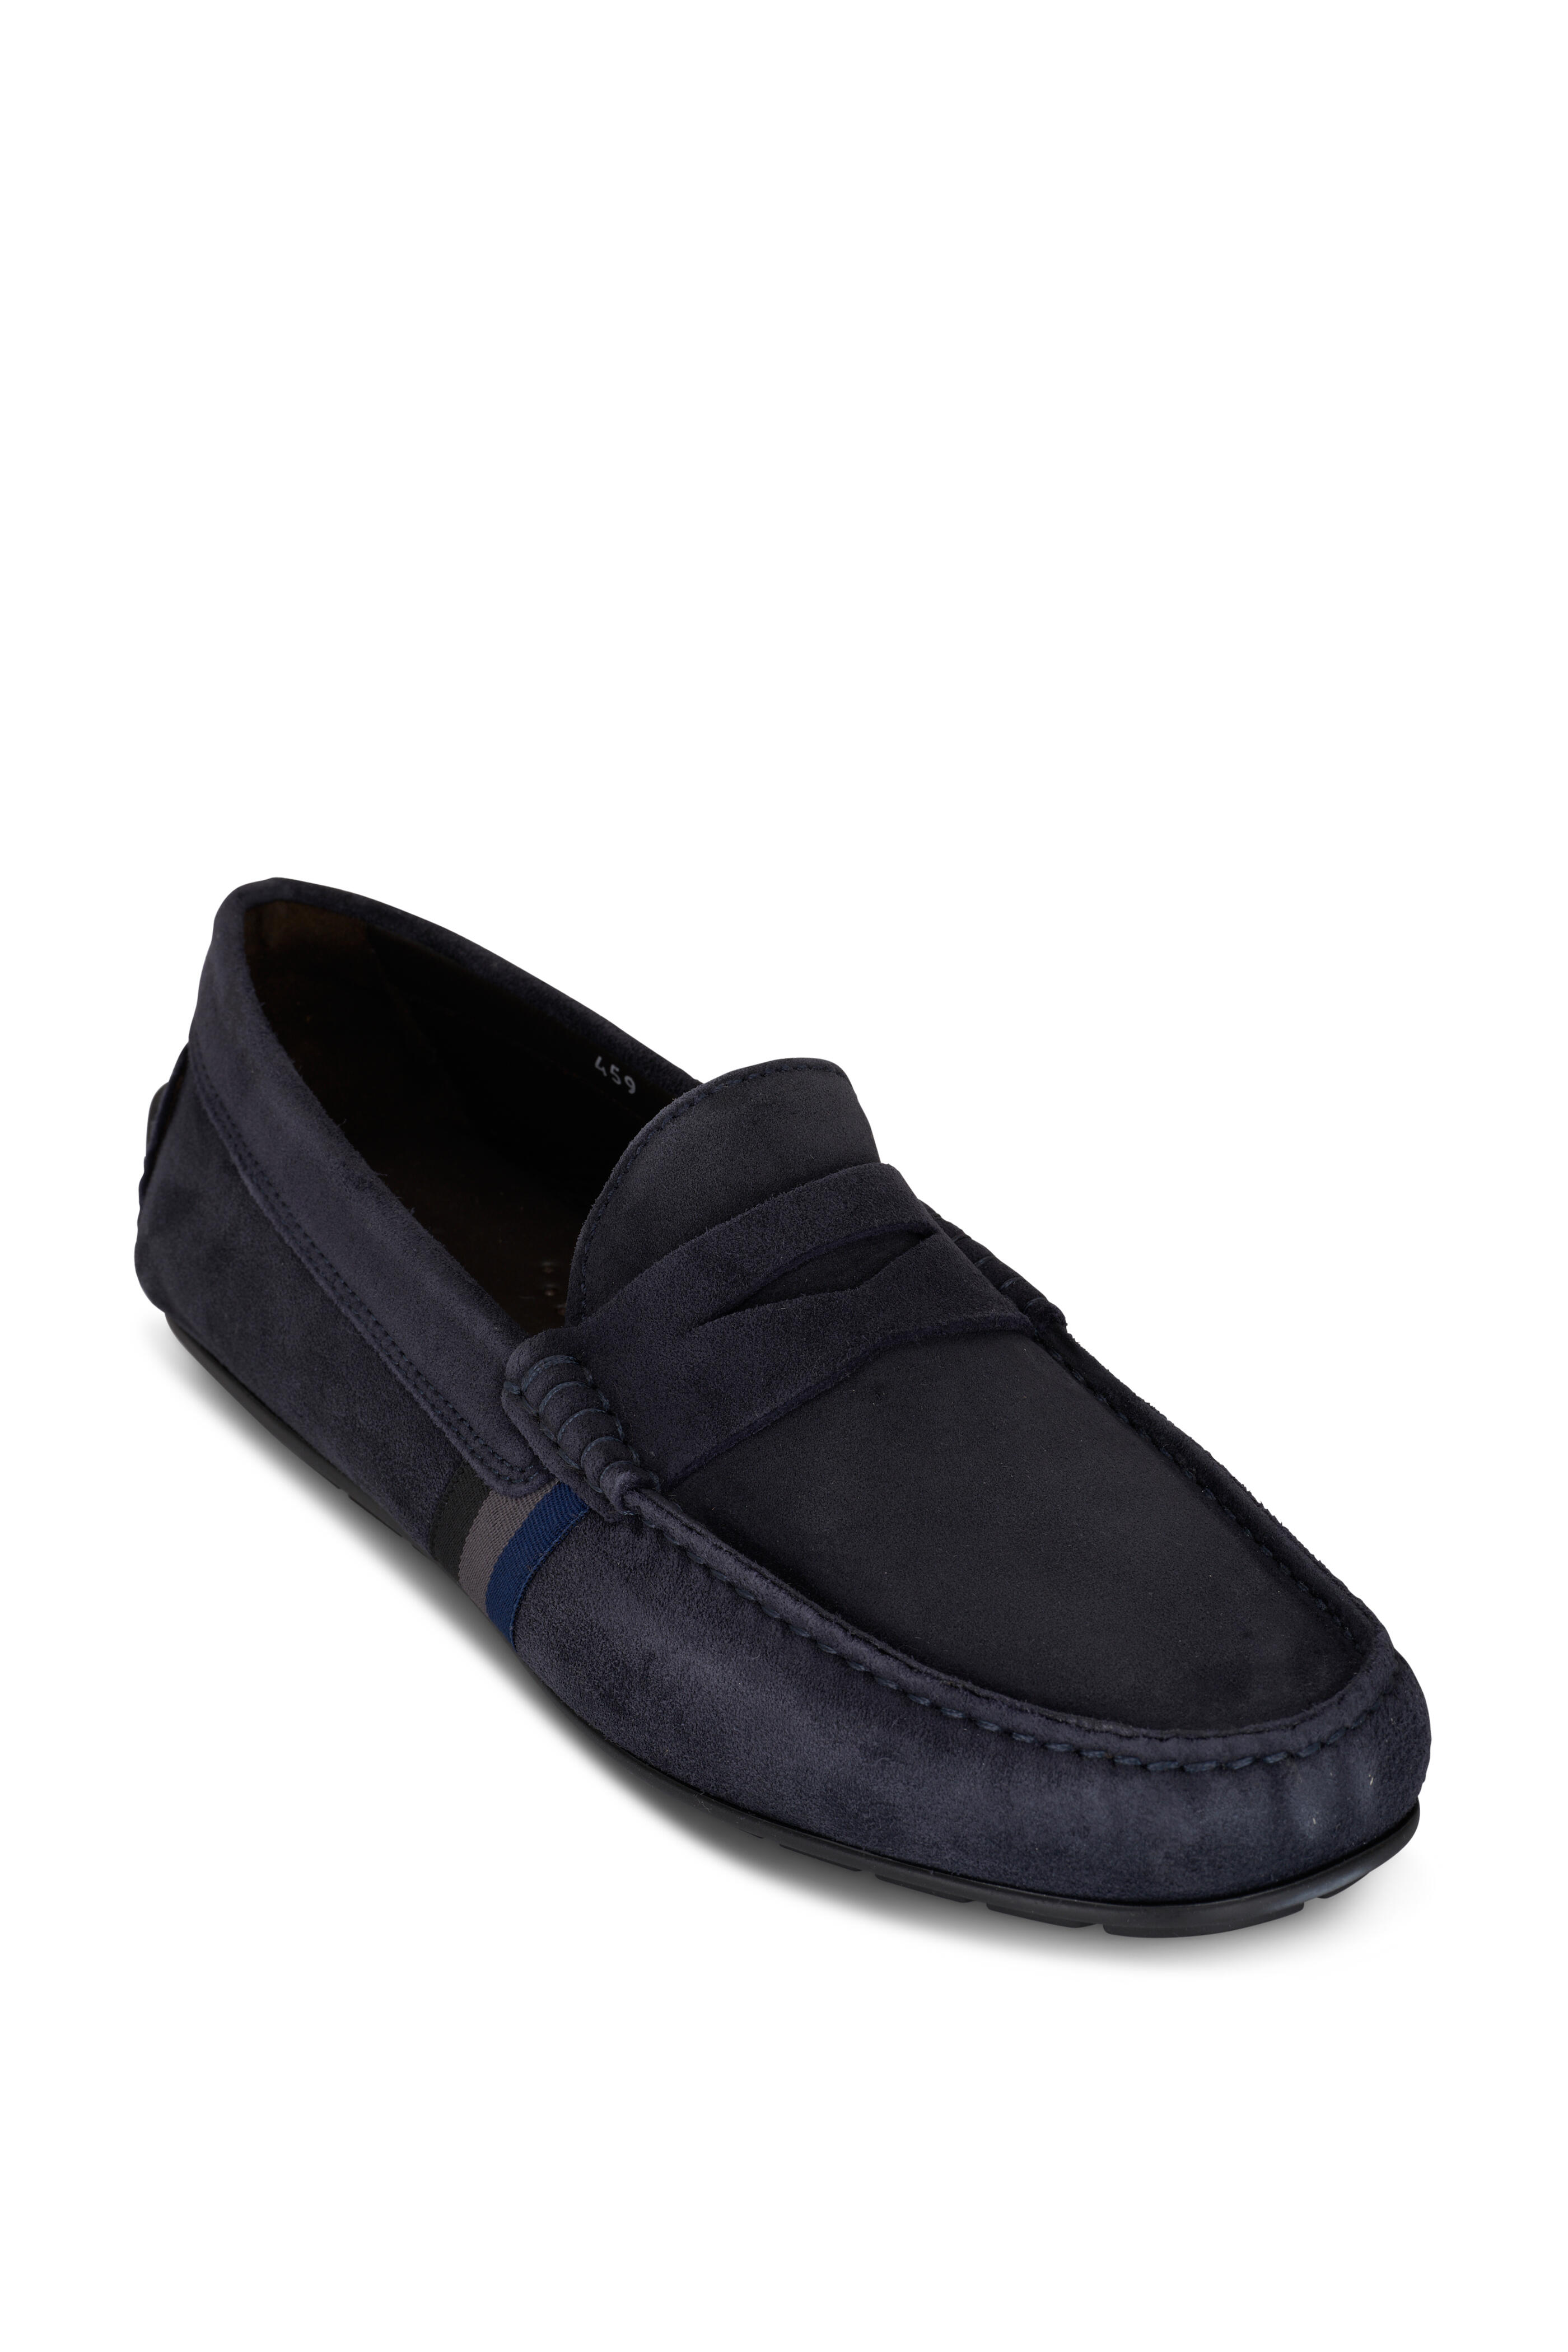 To Boot New York - Ocean Drive Navy Blue Suede Striped Driver